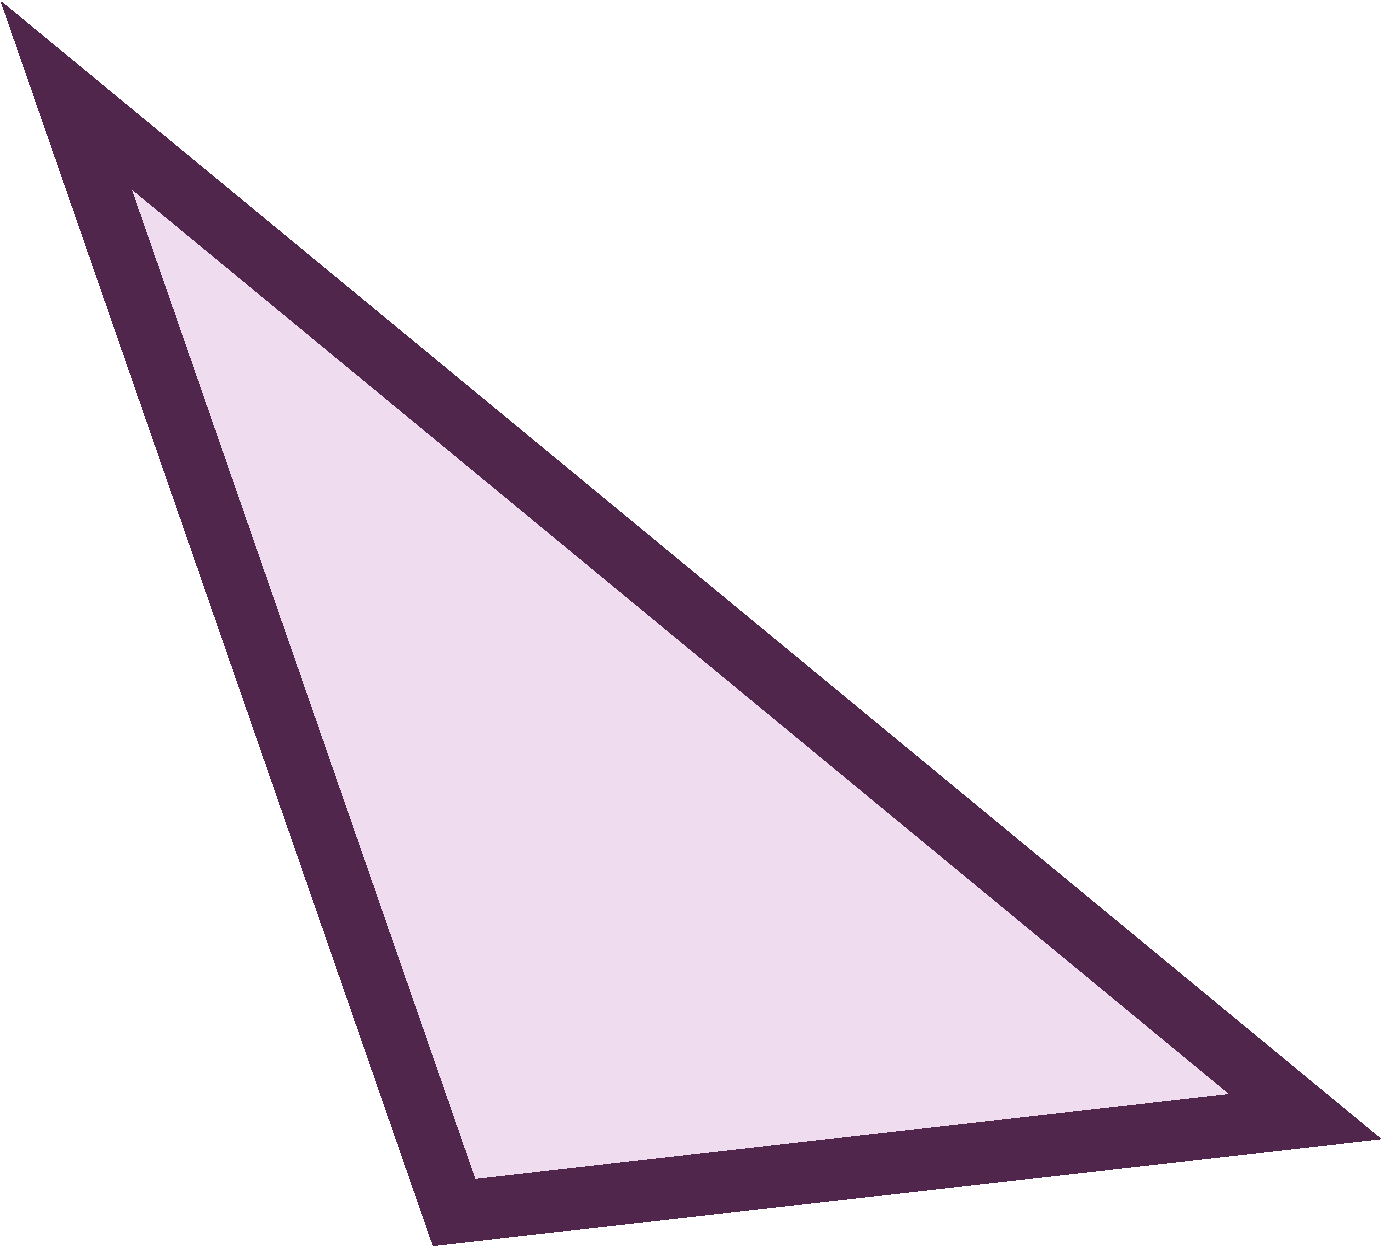 Triangle Png Transparent Image Download Size 1382x1246px